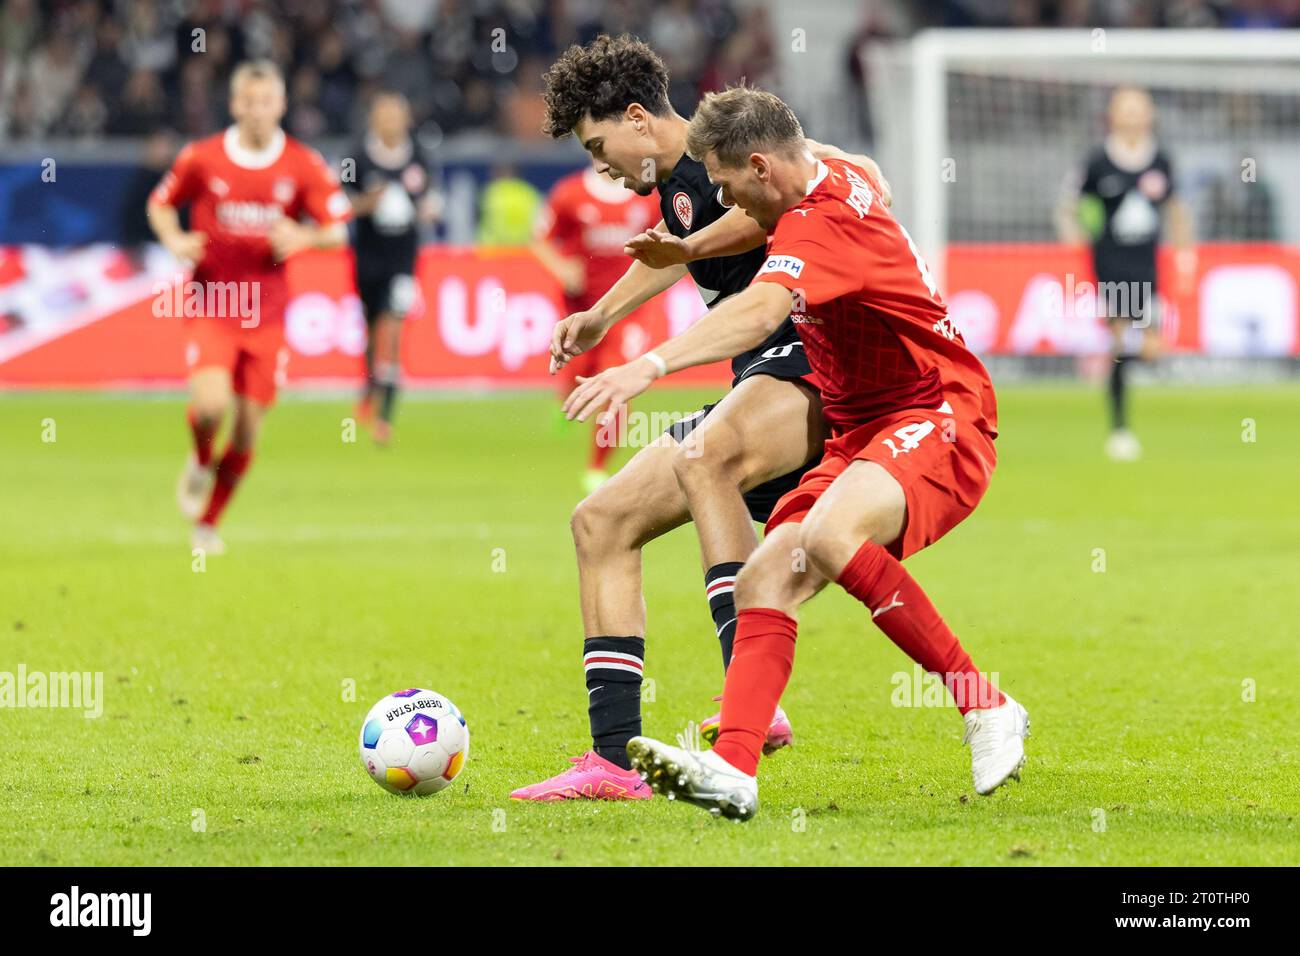 08 October 2023, Hesse, Frankfurt/Main: Soccer: Bundesliga, Eintracht Frankfurt - 1. FC Heidenheim, Matchday 7, Deutsche Bank Park. Ignacio Ferri Julia (M) of Eintracht Frankfurt and Tim Siersleben (r) of Heidenheim fight for the ball. Photo: Jürgen Kessler/dpa - IMPORTANT NOTE: In accordance with the requirements of the DFL Deutsche Fußball Liga and the DFB Deutscher Fußball-Bund, it is prohibited to use or have used photographs taken in the stadium and/or of the match in the form of sequence pictures and/or video-like photo series. Stock Photo